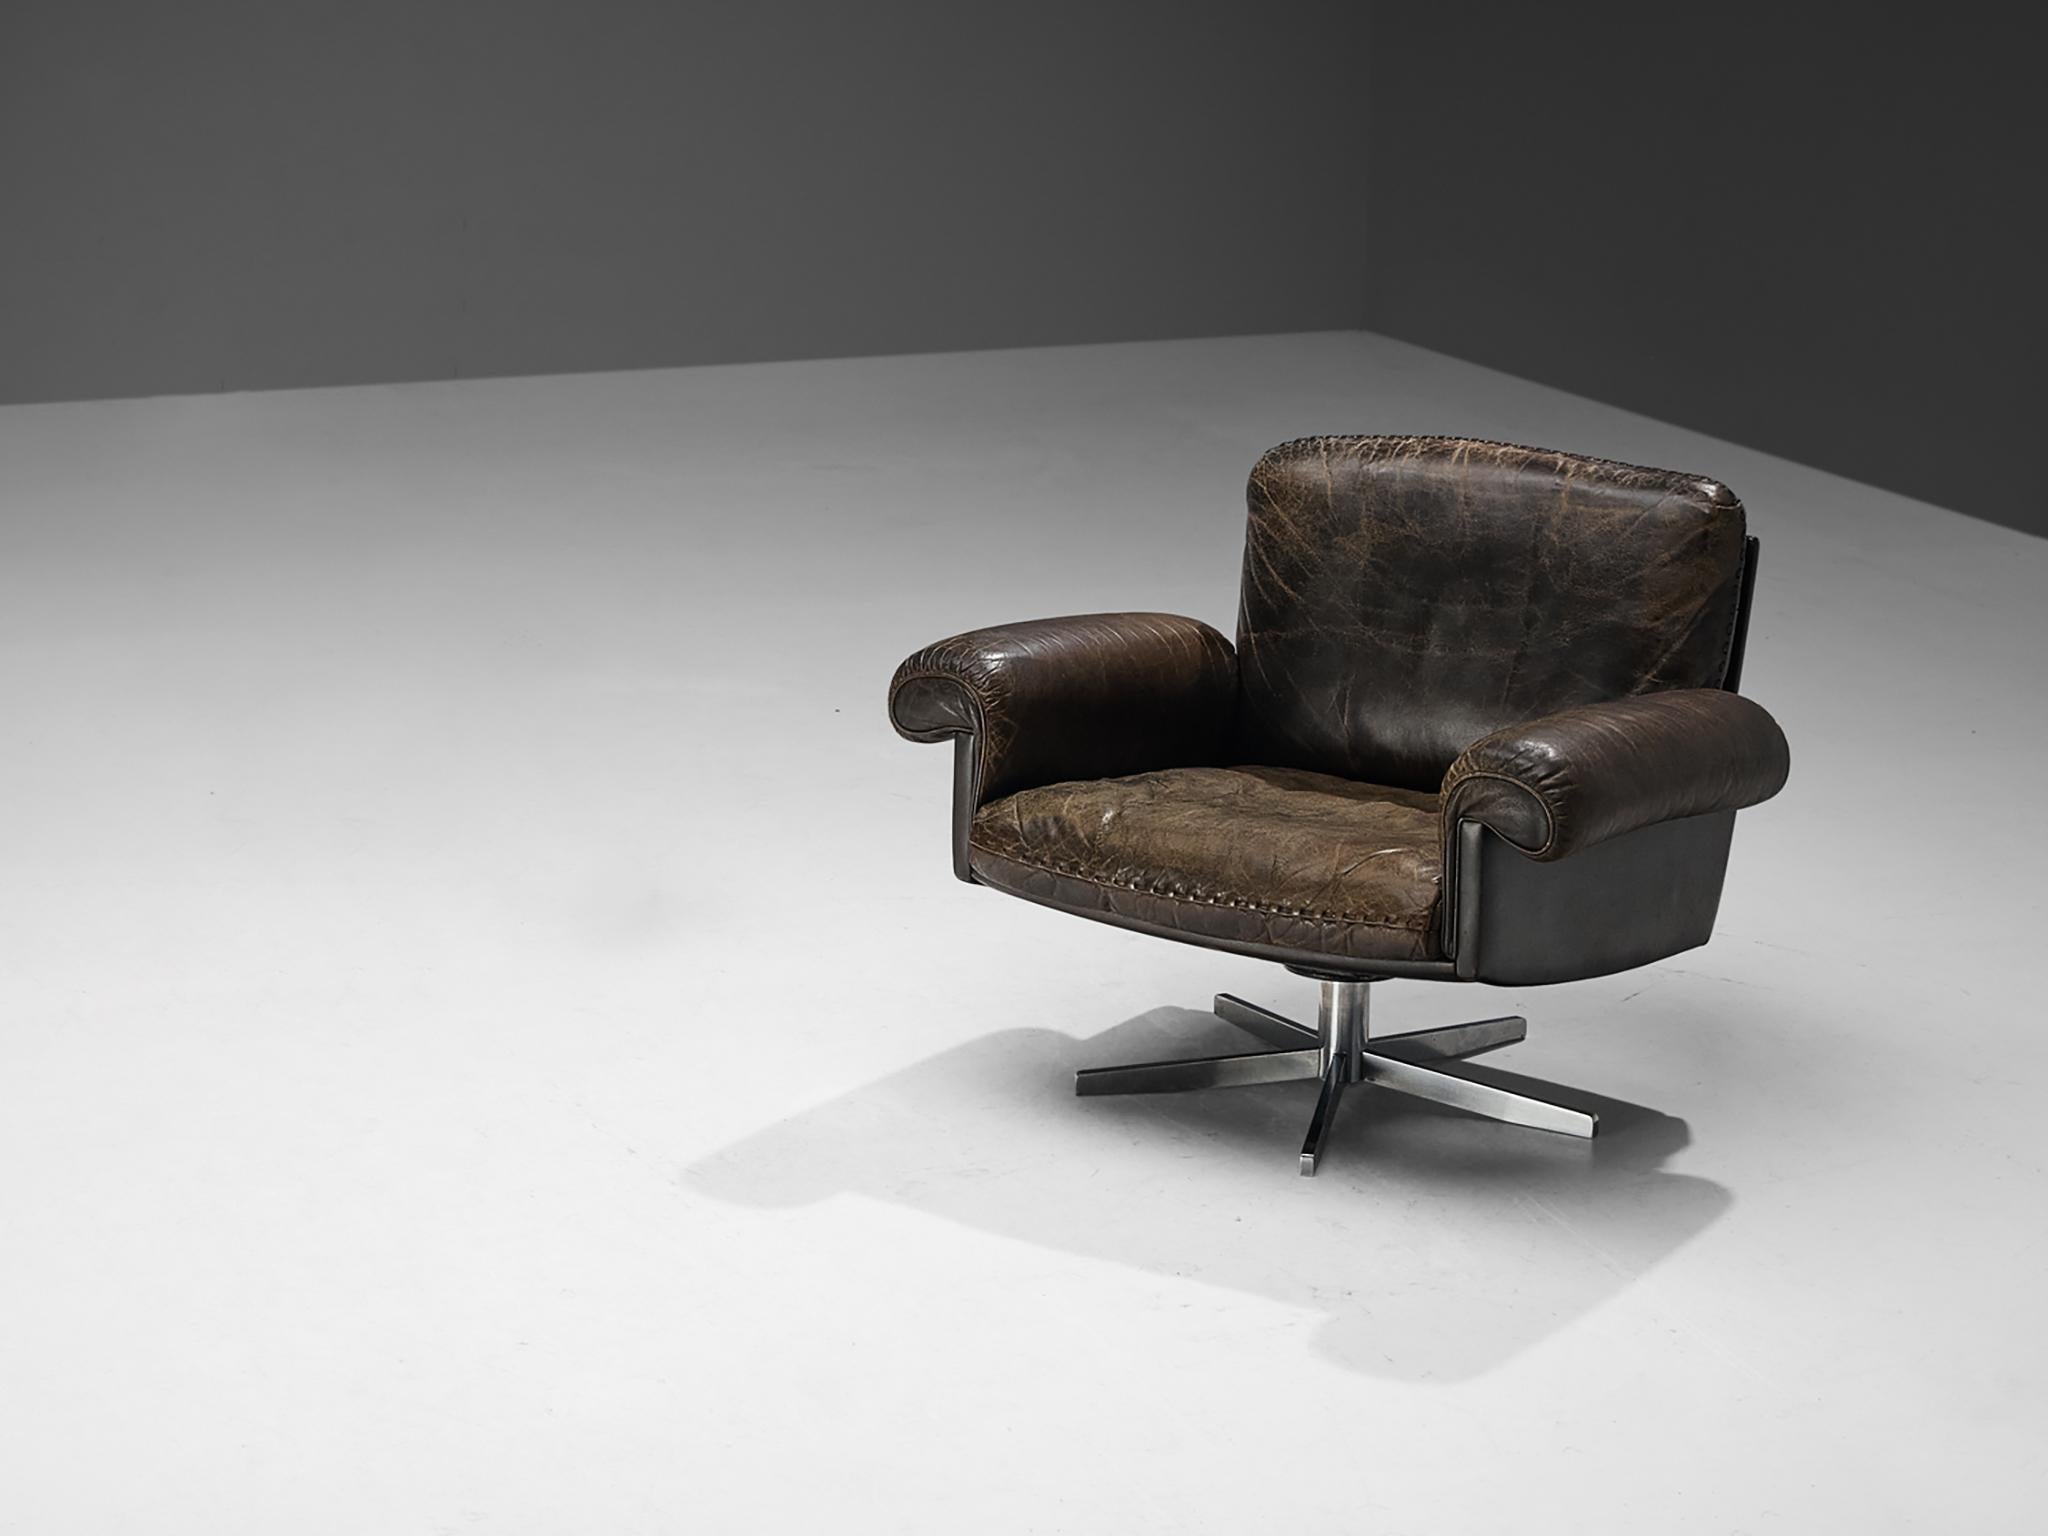 De Sede, lounge chair model 'DS-31', leather, chrome-plated metal, Switzerland, 1970s

A design by De Sede that features a simple yet stately construction. A comfortable sitting experience is guaranteed by means of the deep seat and curved armrests.